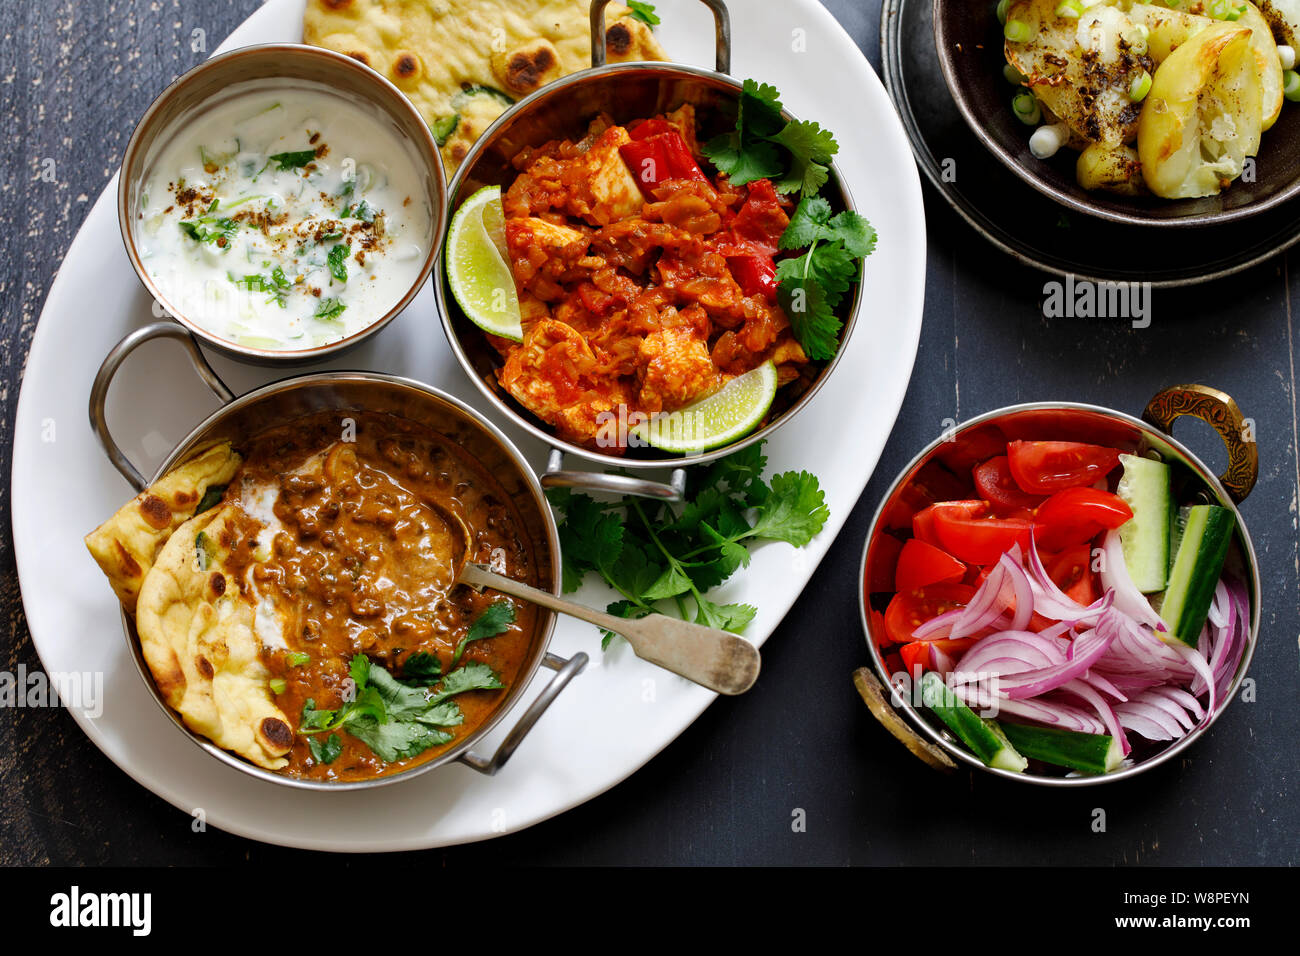 Indian curry meal with black lentils dal, spicy potatoes, rice, naan bread and raita Stock Photo